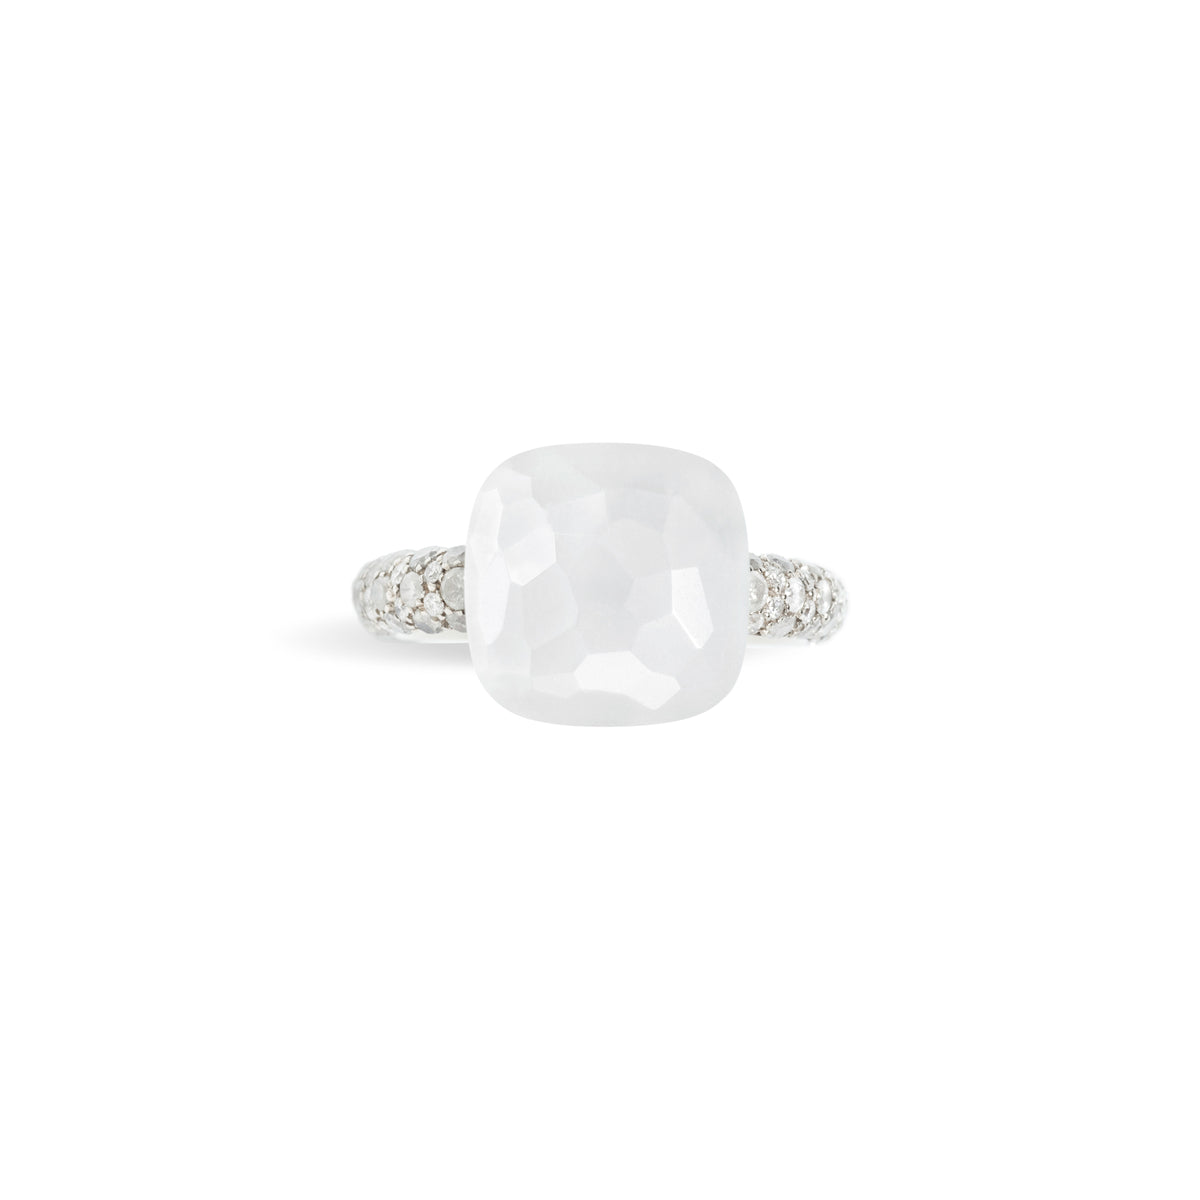 Nudo Maxi Diamond Ring in 18k White Gold with Moonstone and Diamonds - Orsini Jewellers NZ